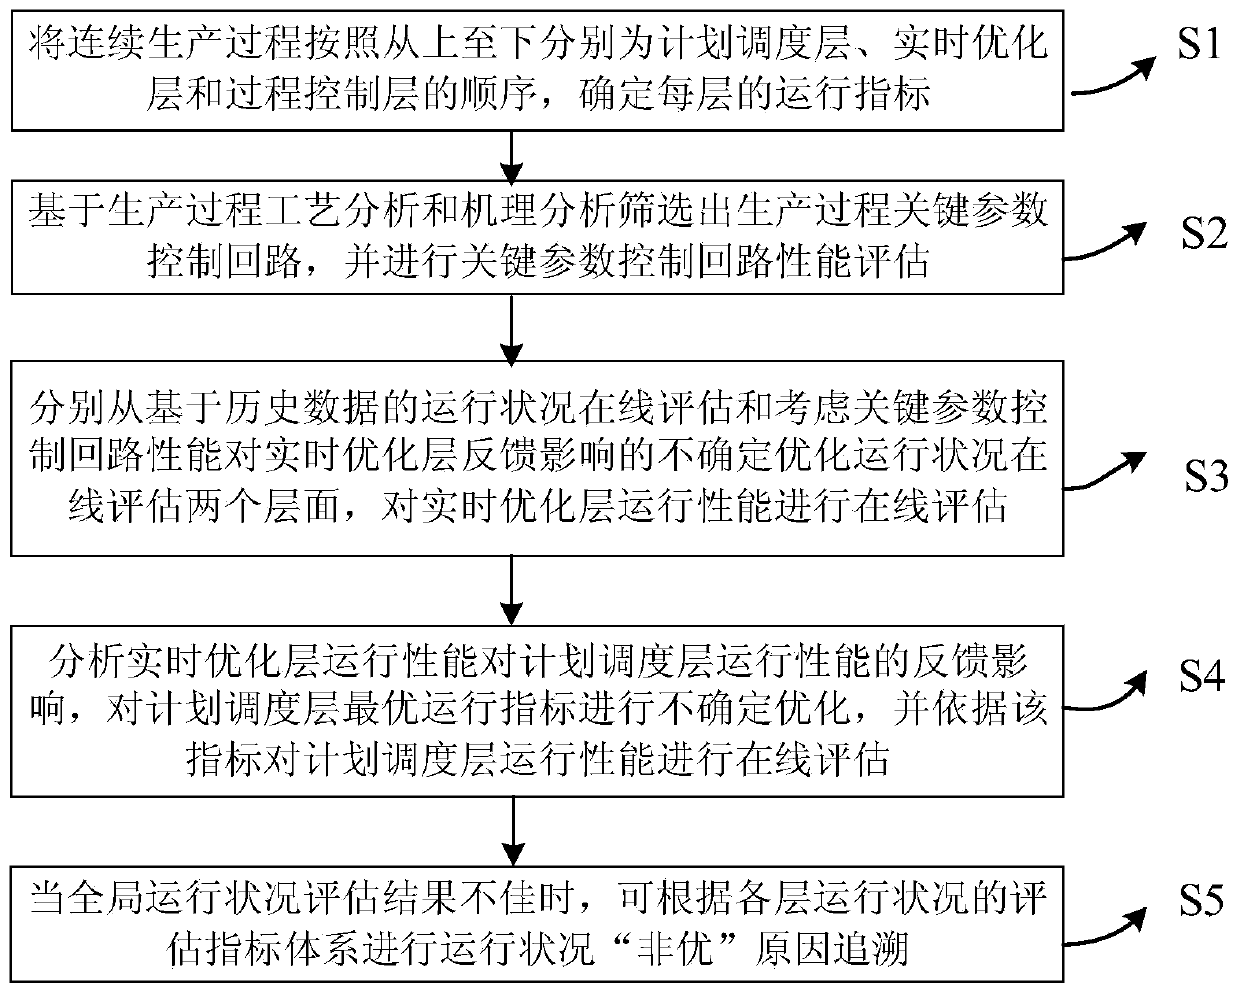 Method suitable for online evaluation of global operation condition in continuous production process